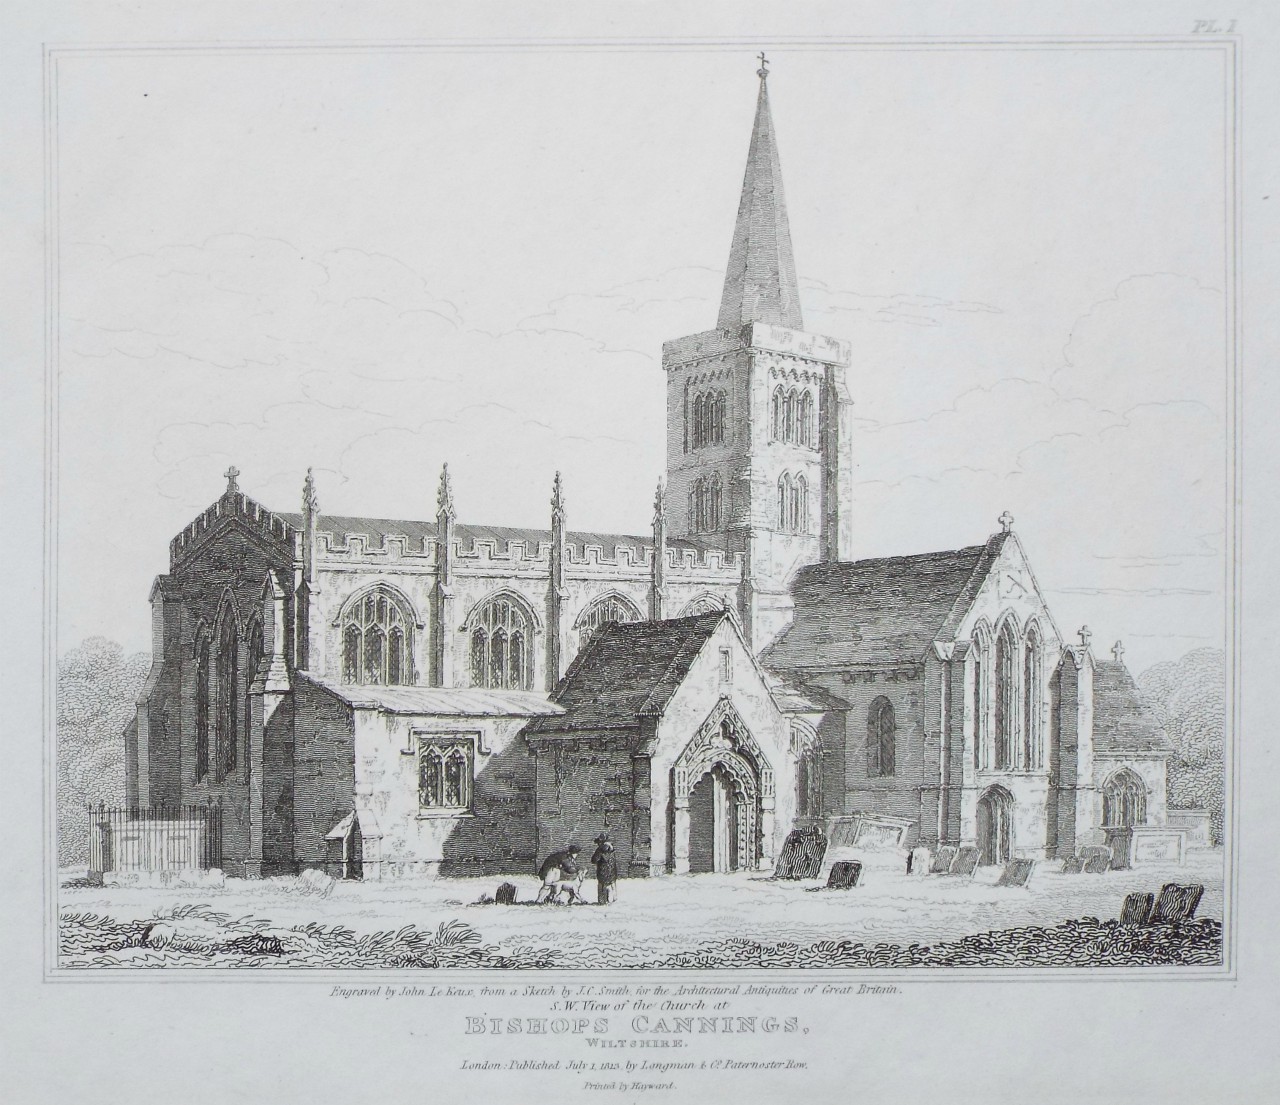 Print - S.W. View of the Church at Bishops Cannings, Wiltshire - Le